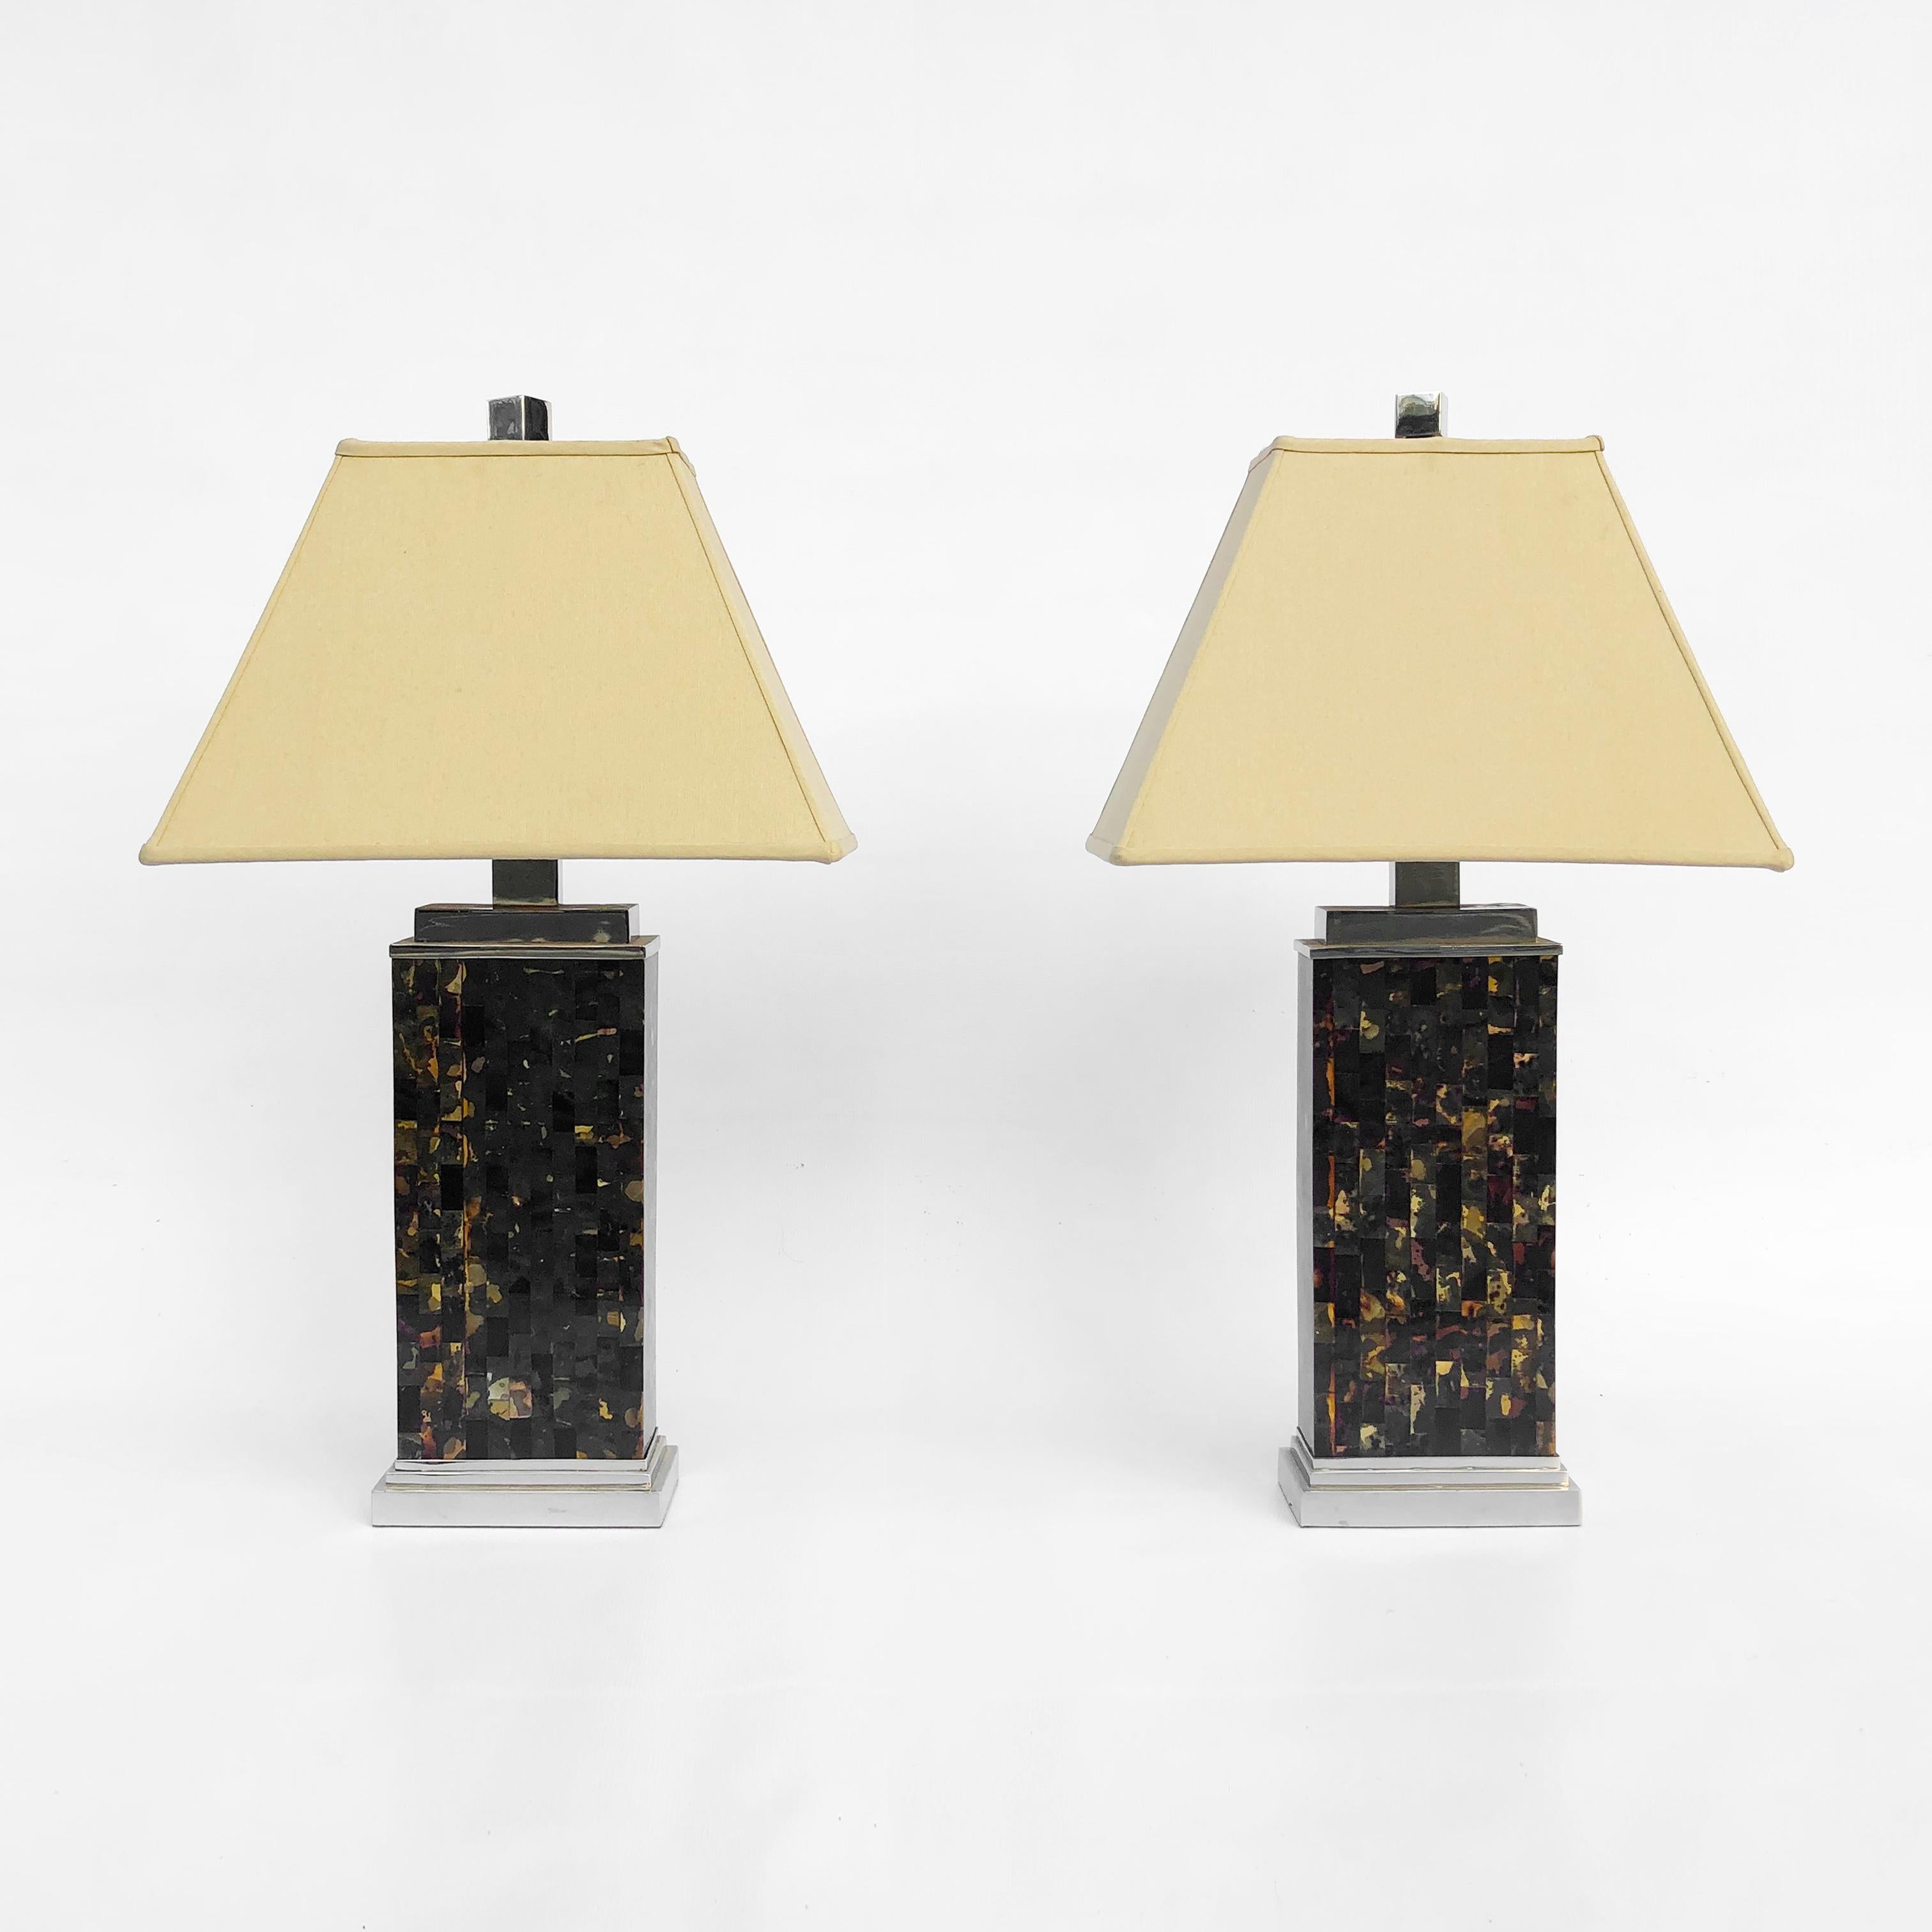 Elegant pair of 1970s tessellated tortoiseshell lamps on chrome pedestal bases and beautiful pyramid lined lampshades with finials. The lamps have an exotic Art Deco feel, starting from the pedestal chrome base and finishing on the pyramid style